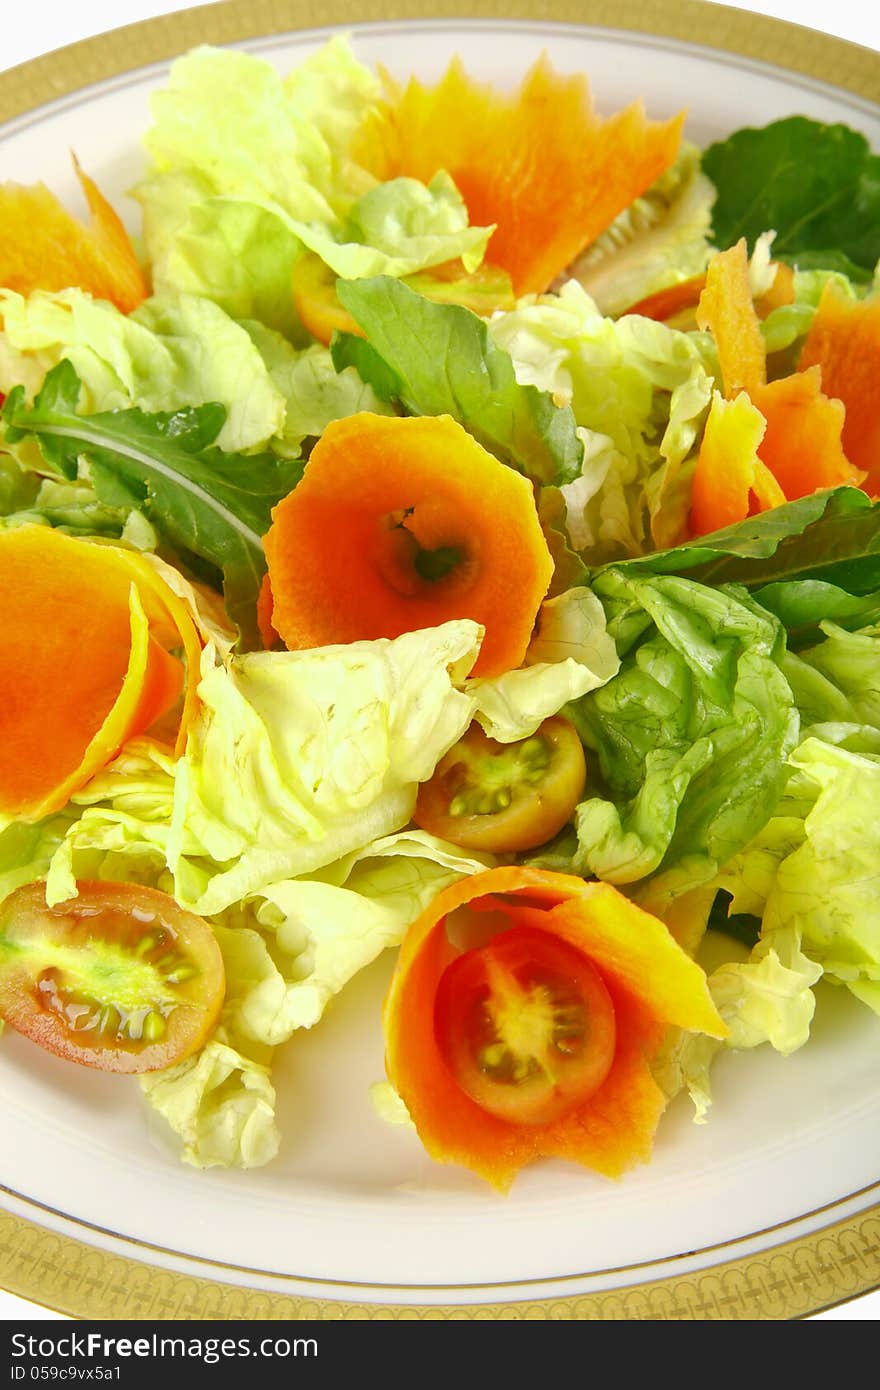 Fresh vegetables: carrot and lettuce; healthy eating and dietary. Fresh vegetables: carrot and lettuce; healthy eating and dietary